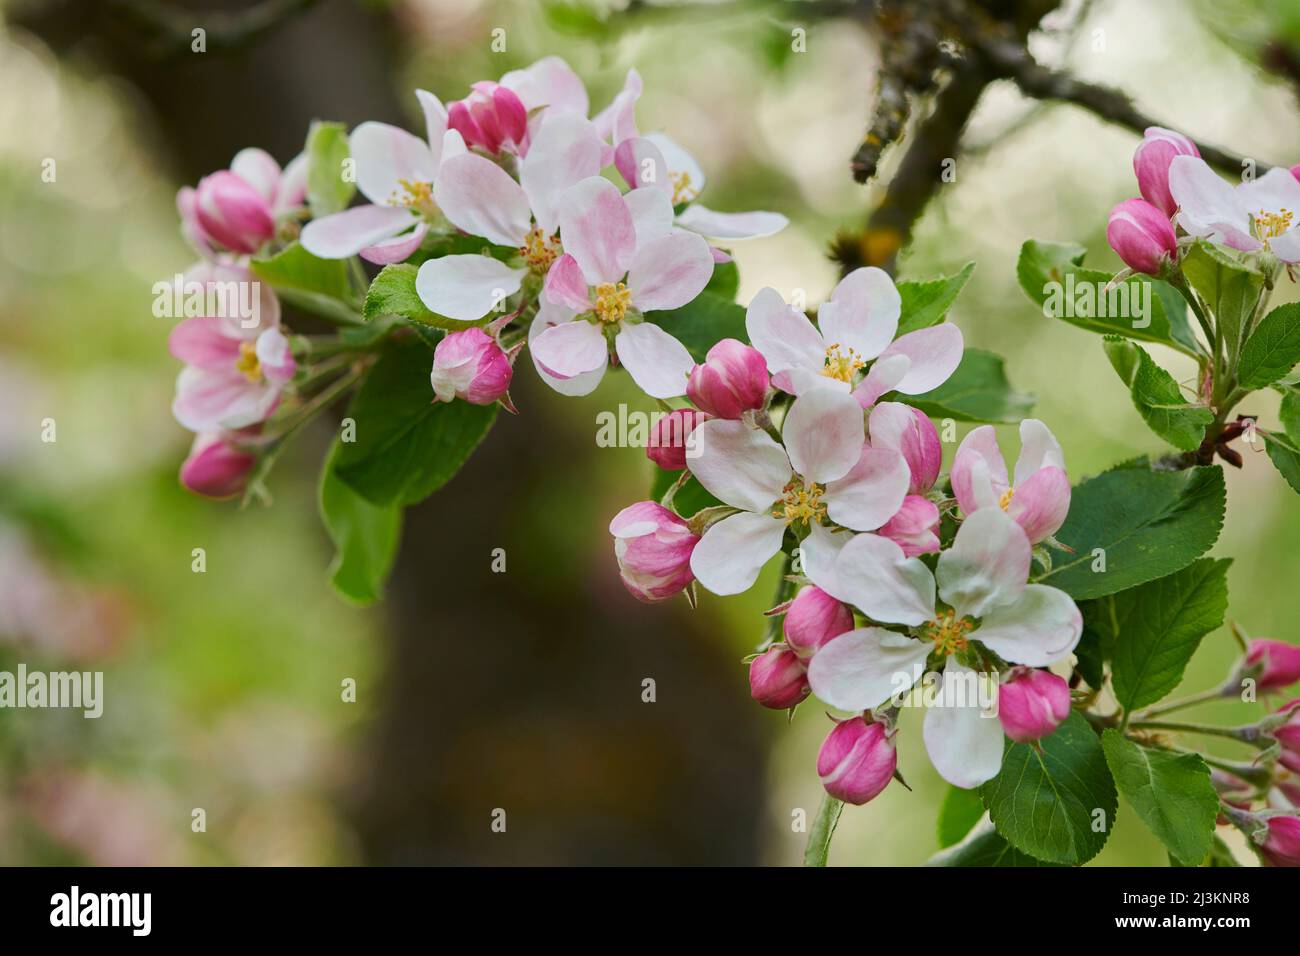 Close-up of delicate flower blossoms and leaves on a domestic apple tree (Malus domestica) branch in spring; Bavarian Forest, Bavaria, Germany Stock Photo